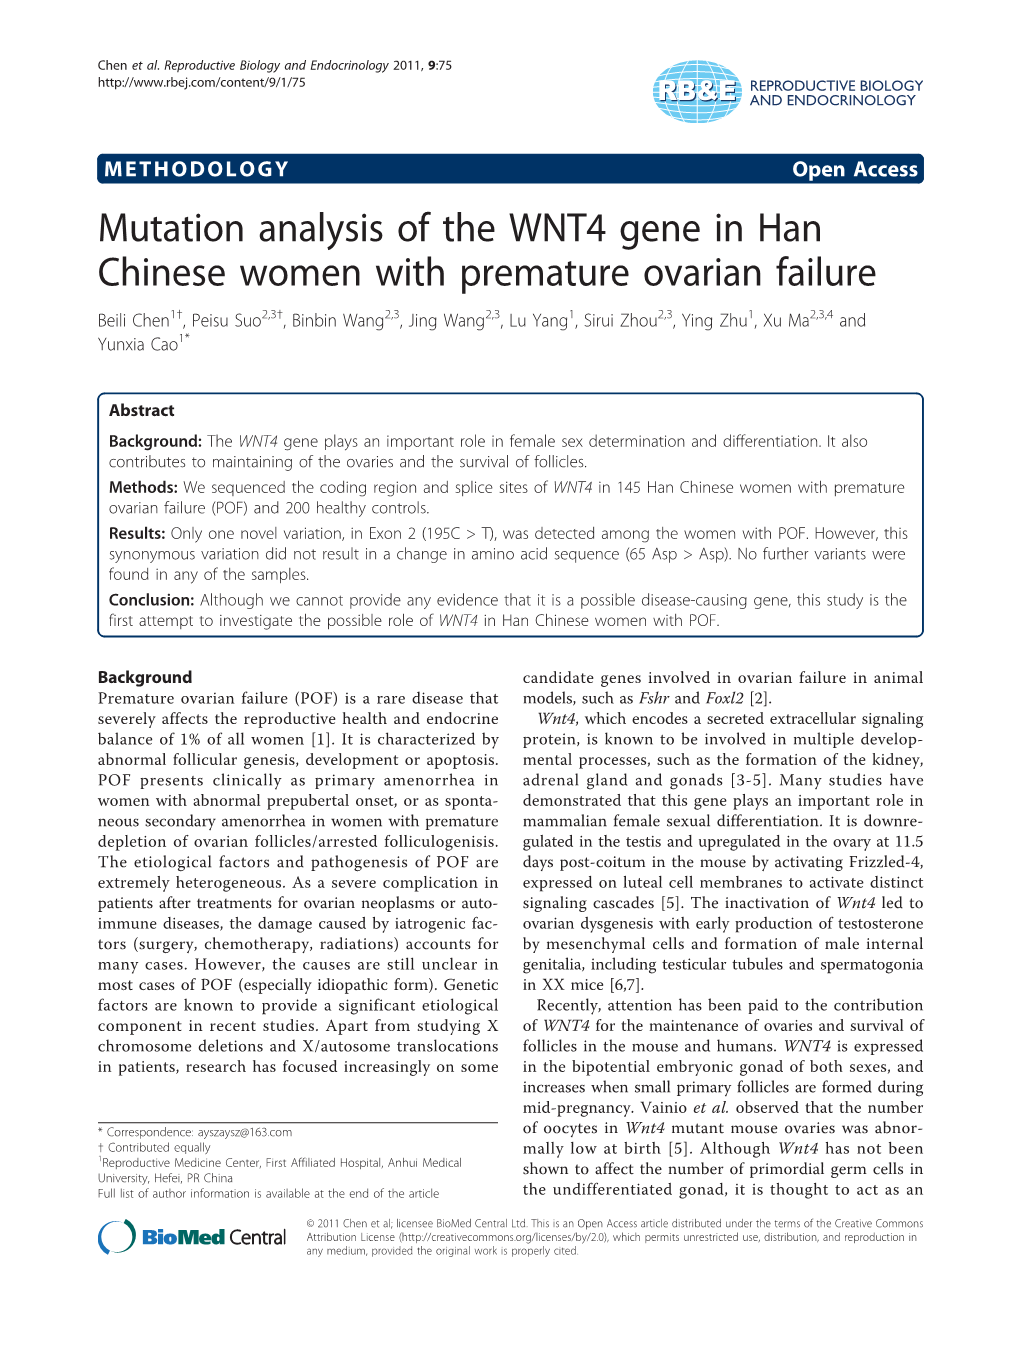 Mutation Analysis of the WNT4 Gene in Han Chinese Women With